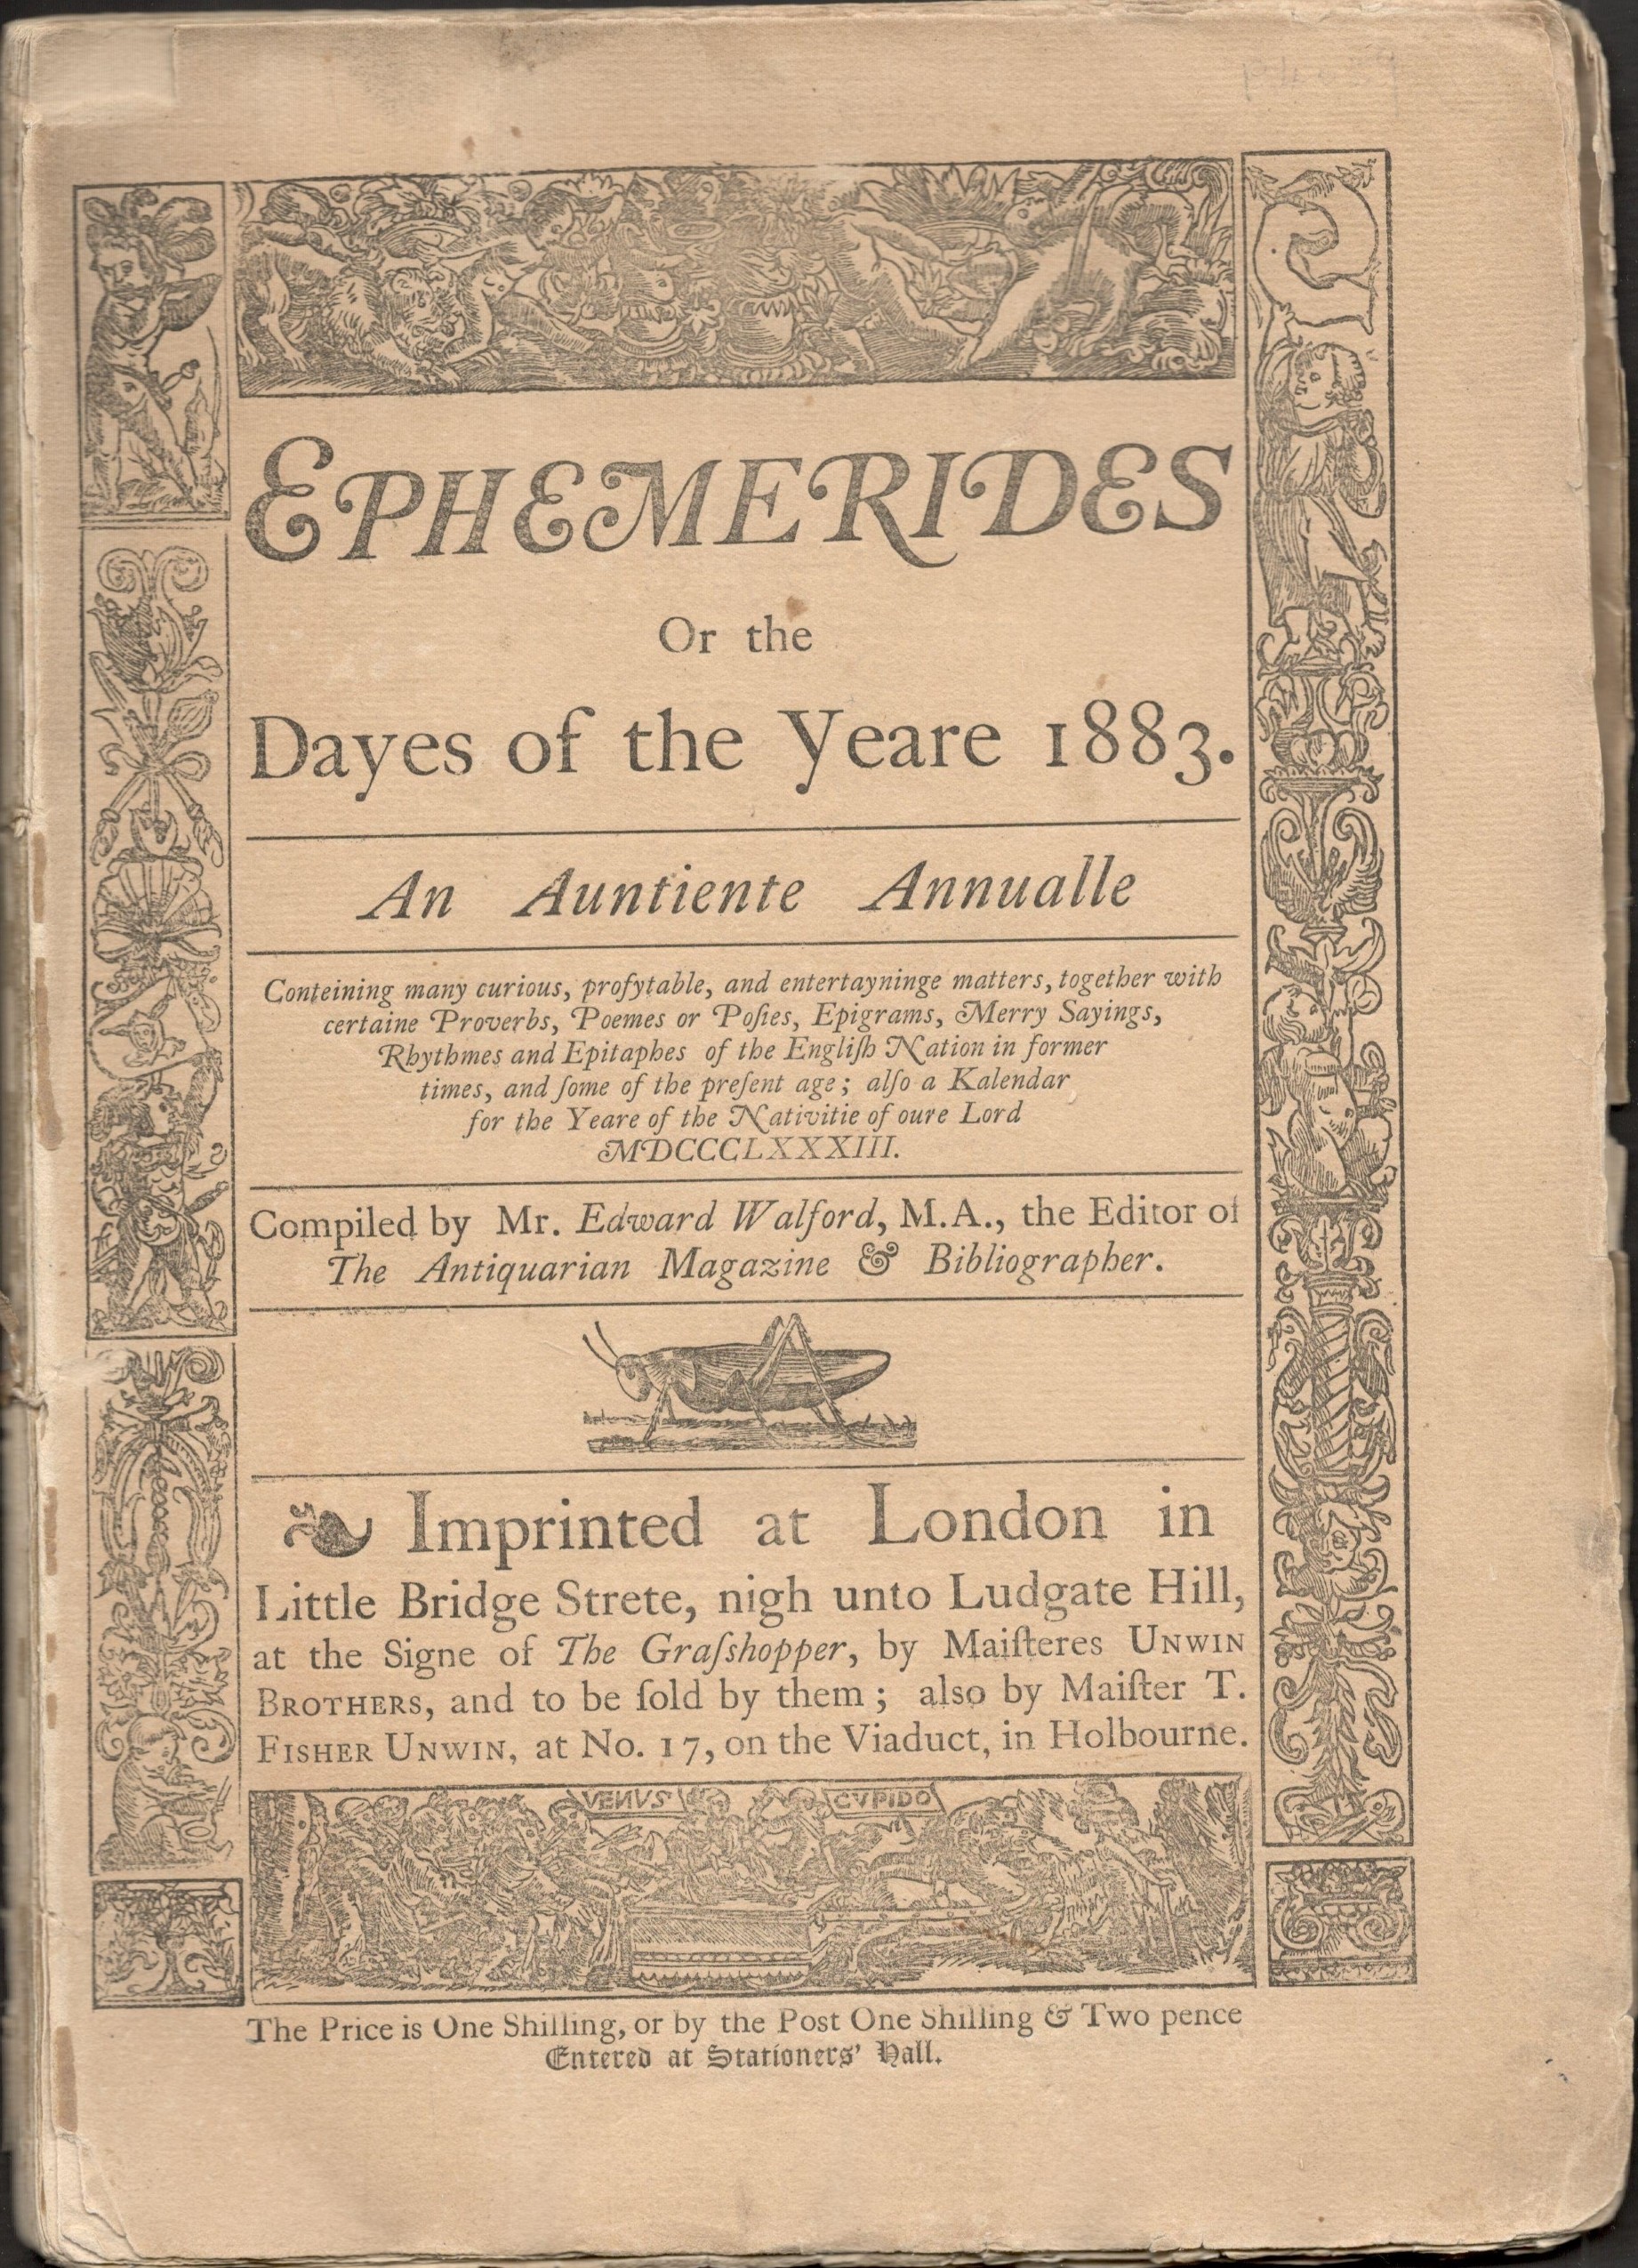 EPHEMERIDES OR THE DAYES OF THE YEARE 1883 ANTIQUE MAGAZINE COMPILED BY MR. EDWARD WALFORD M.A